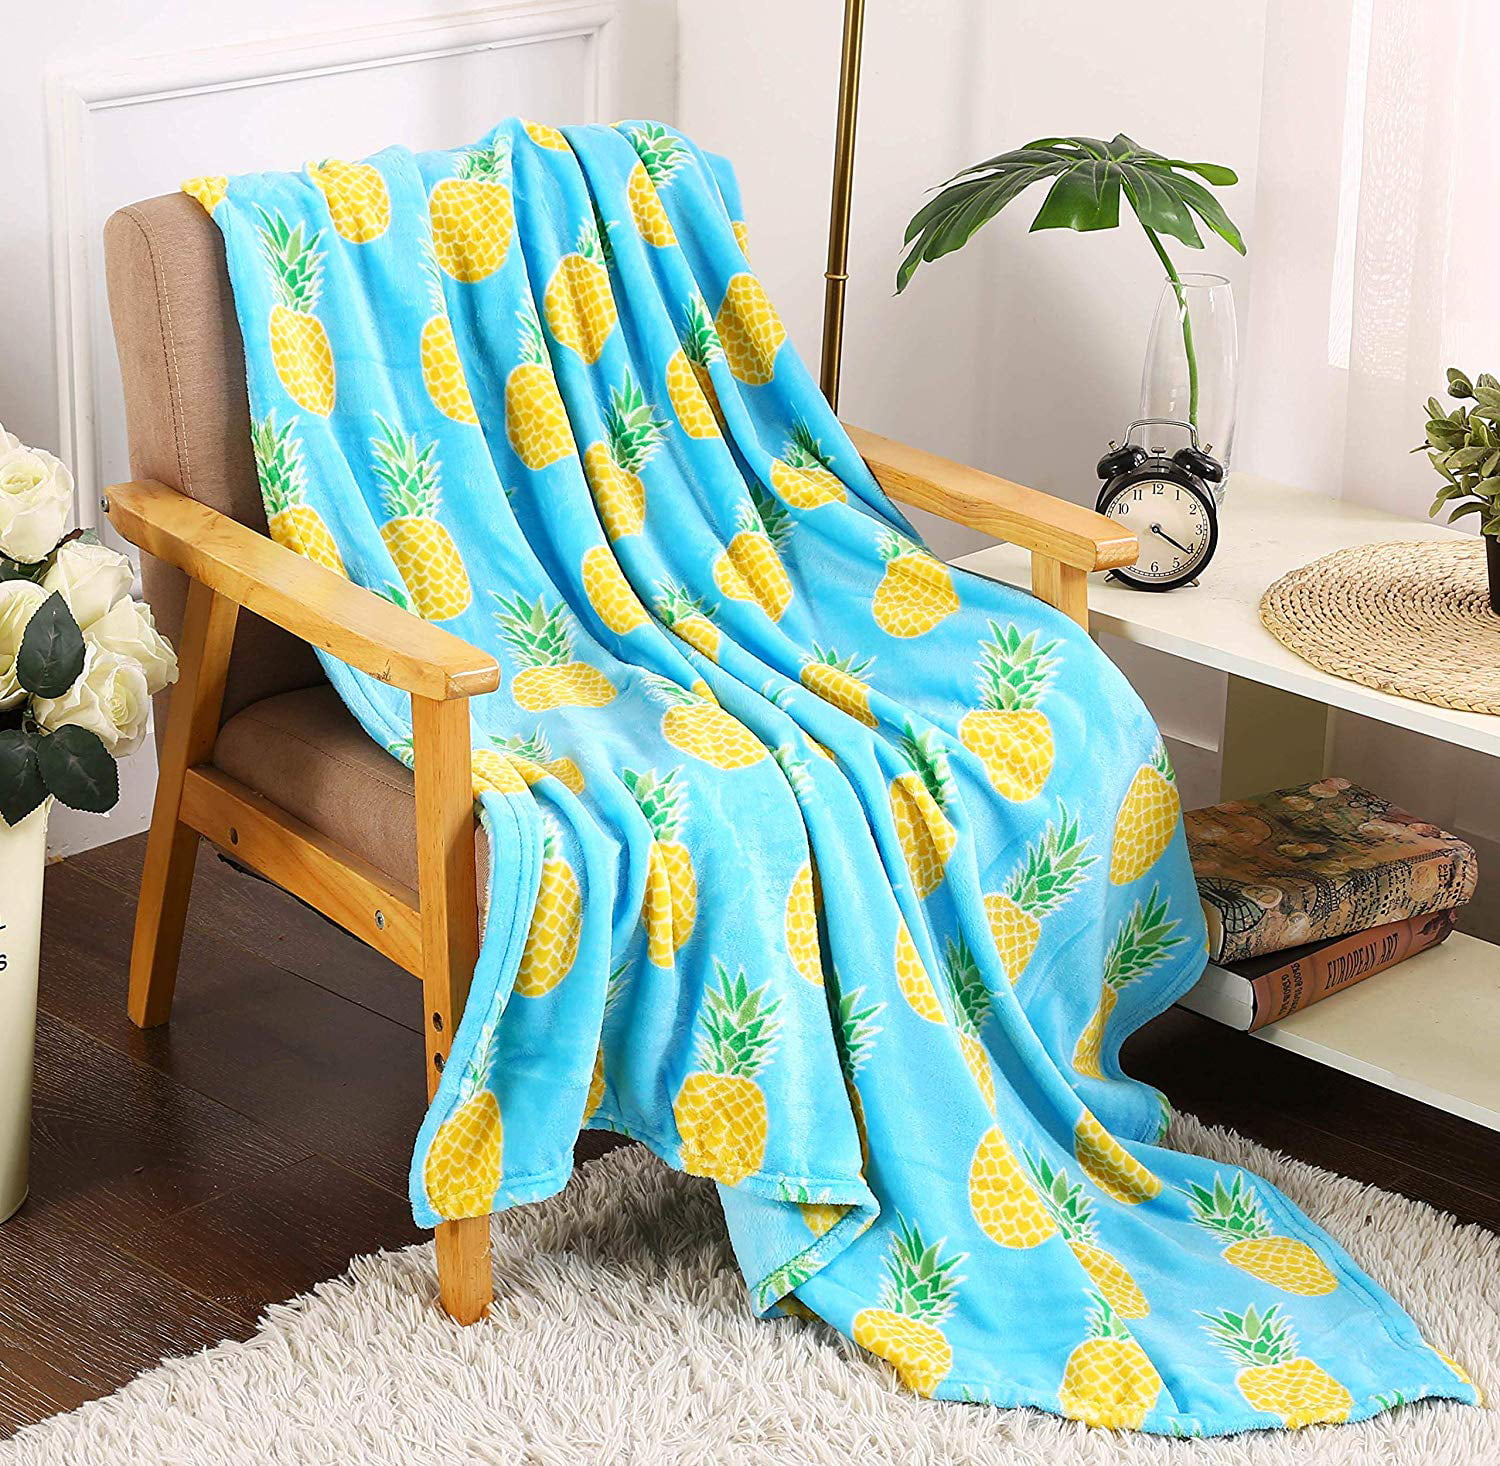 Chucoco Vintage Tropical Fruits Pineapple with Flamingo Throw Blanket Fuzzy Soft Plush Blankets for Women/Men/Kids Teens Bedroom Living Room Flowers